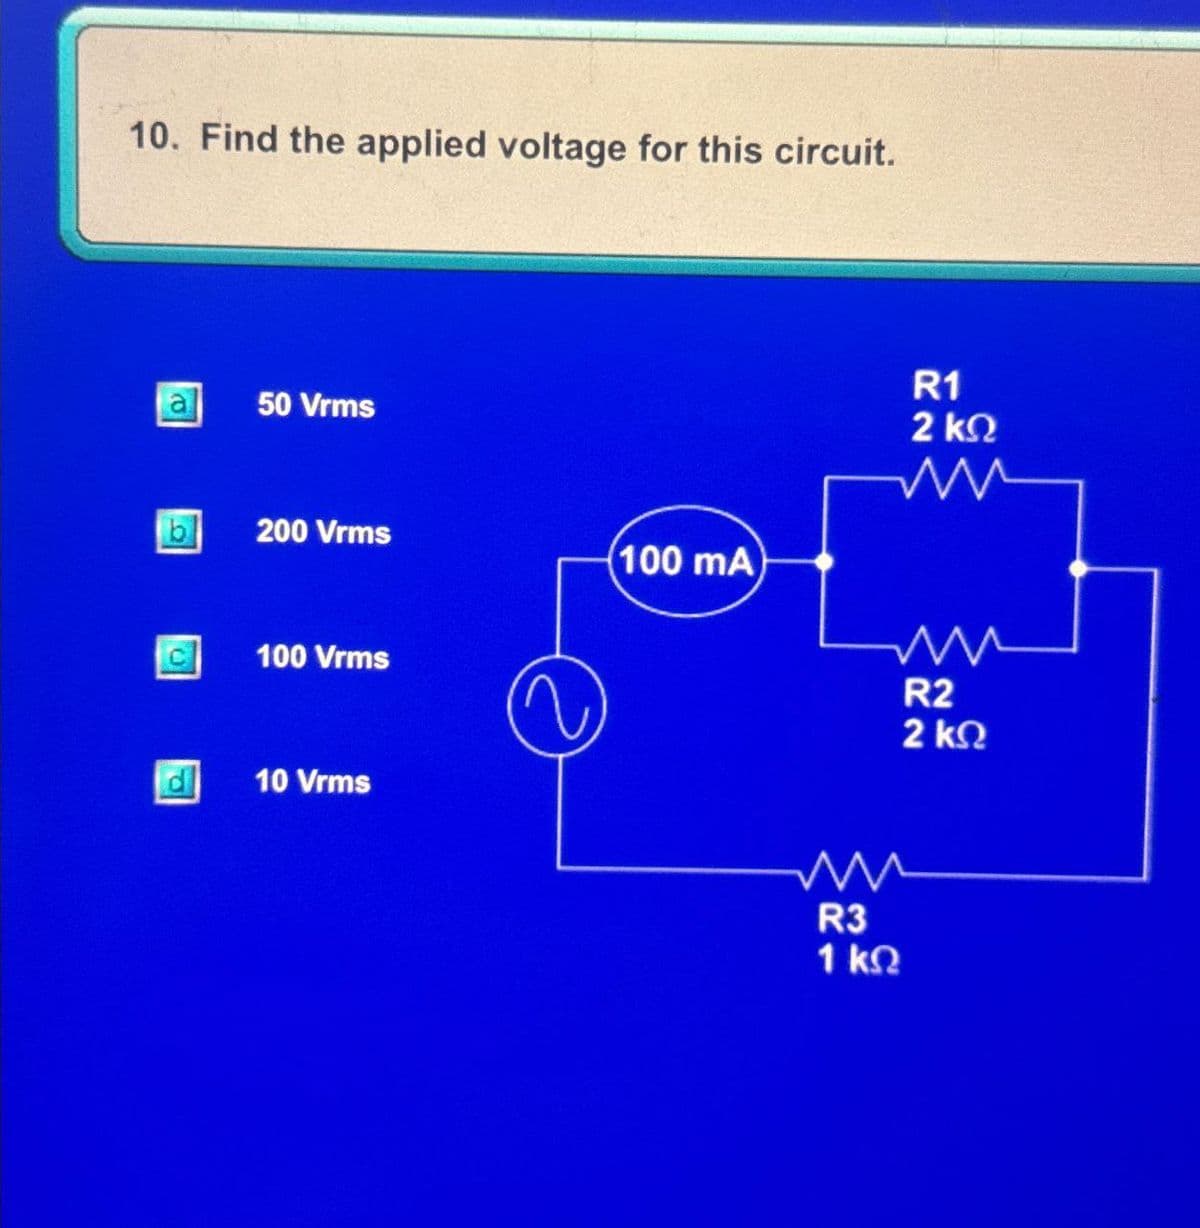 10. Find the applied voltage for this circuit.
50 Vrms
R1
2 ΚΩ
b
200 Vrms
100 mA)
100 Vrms
пи
10 Vrms
w
R3
1 ΚΩ
R2
2 ΚΩ